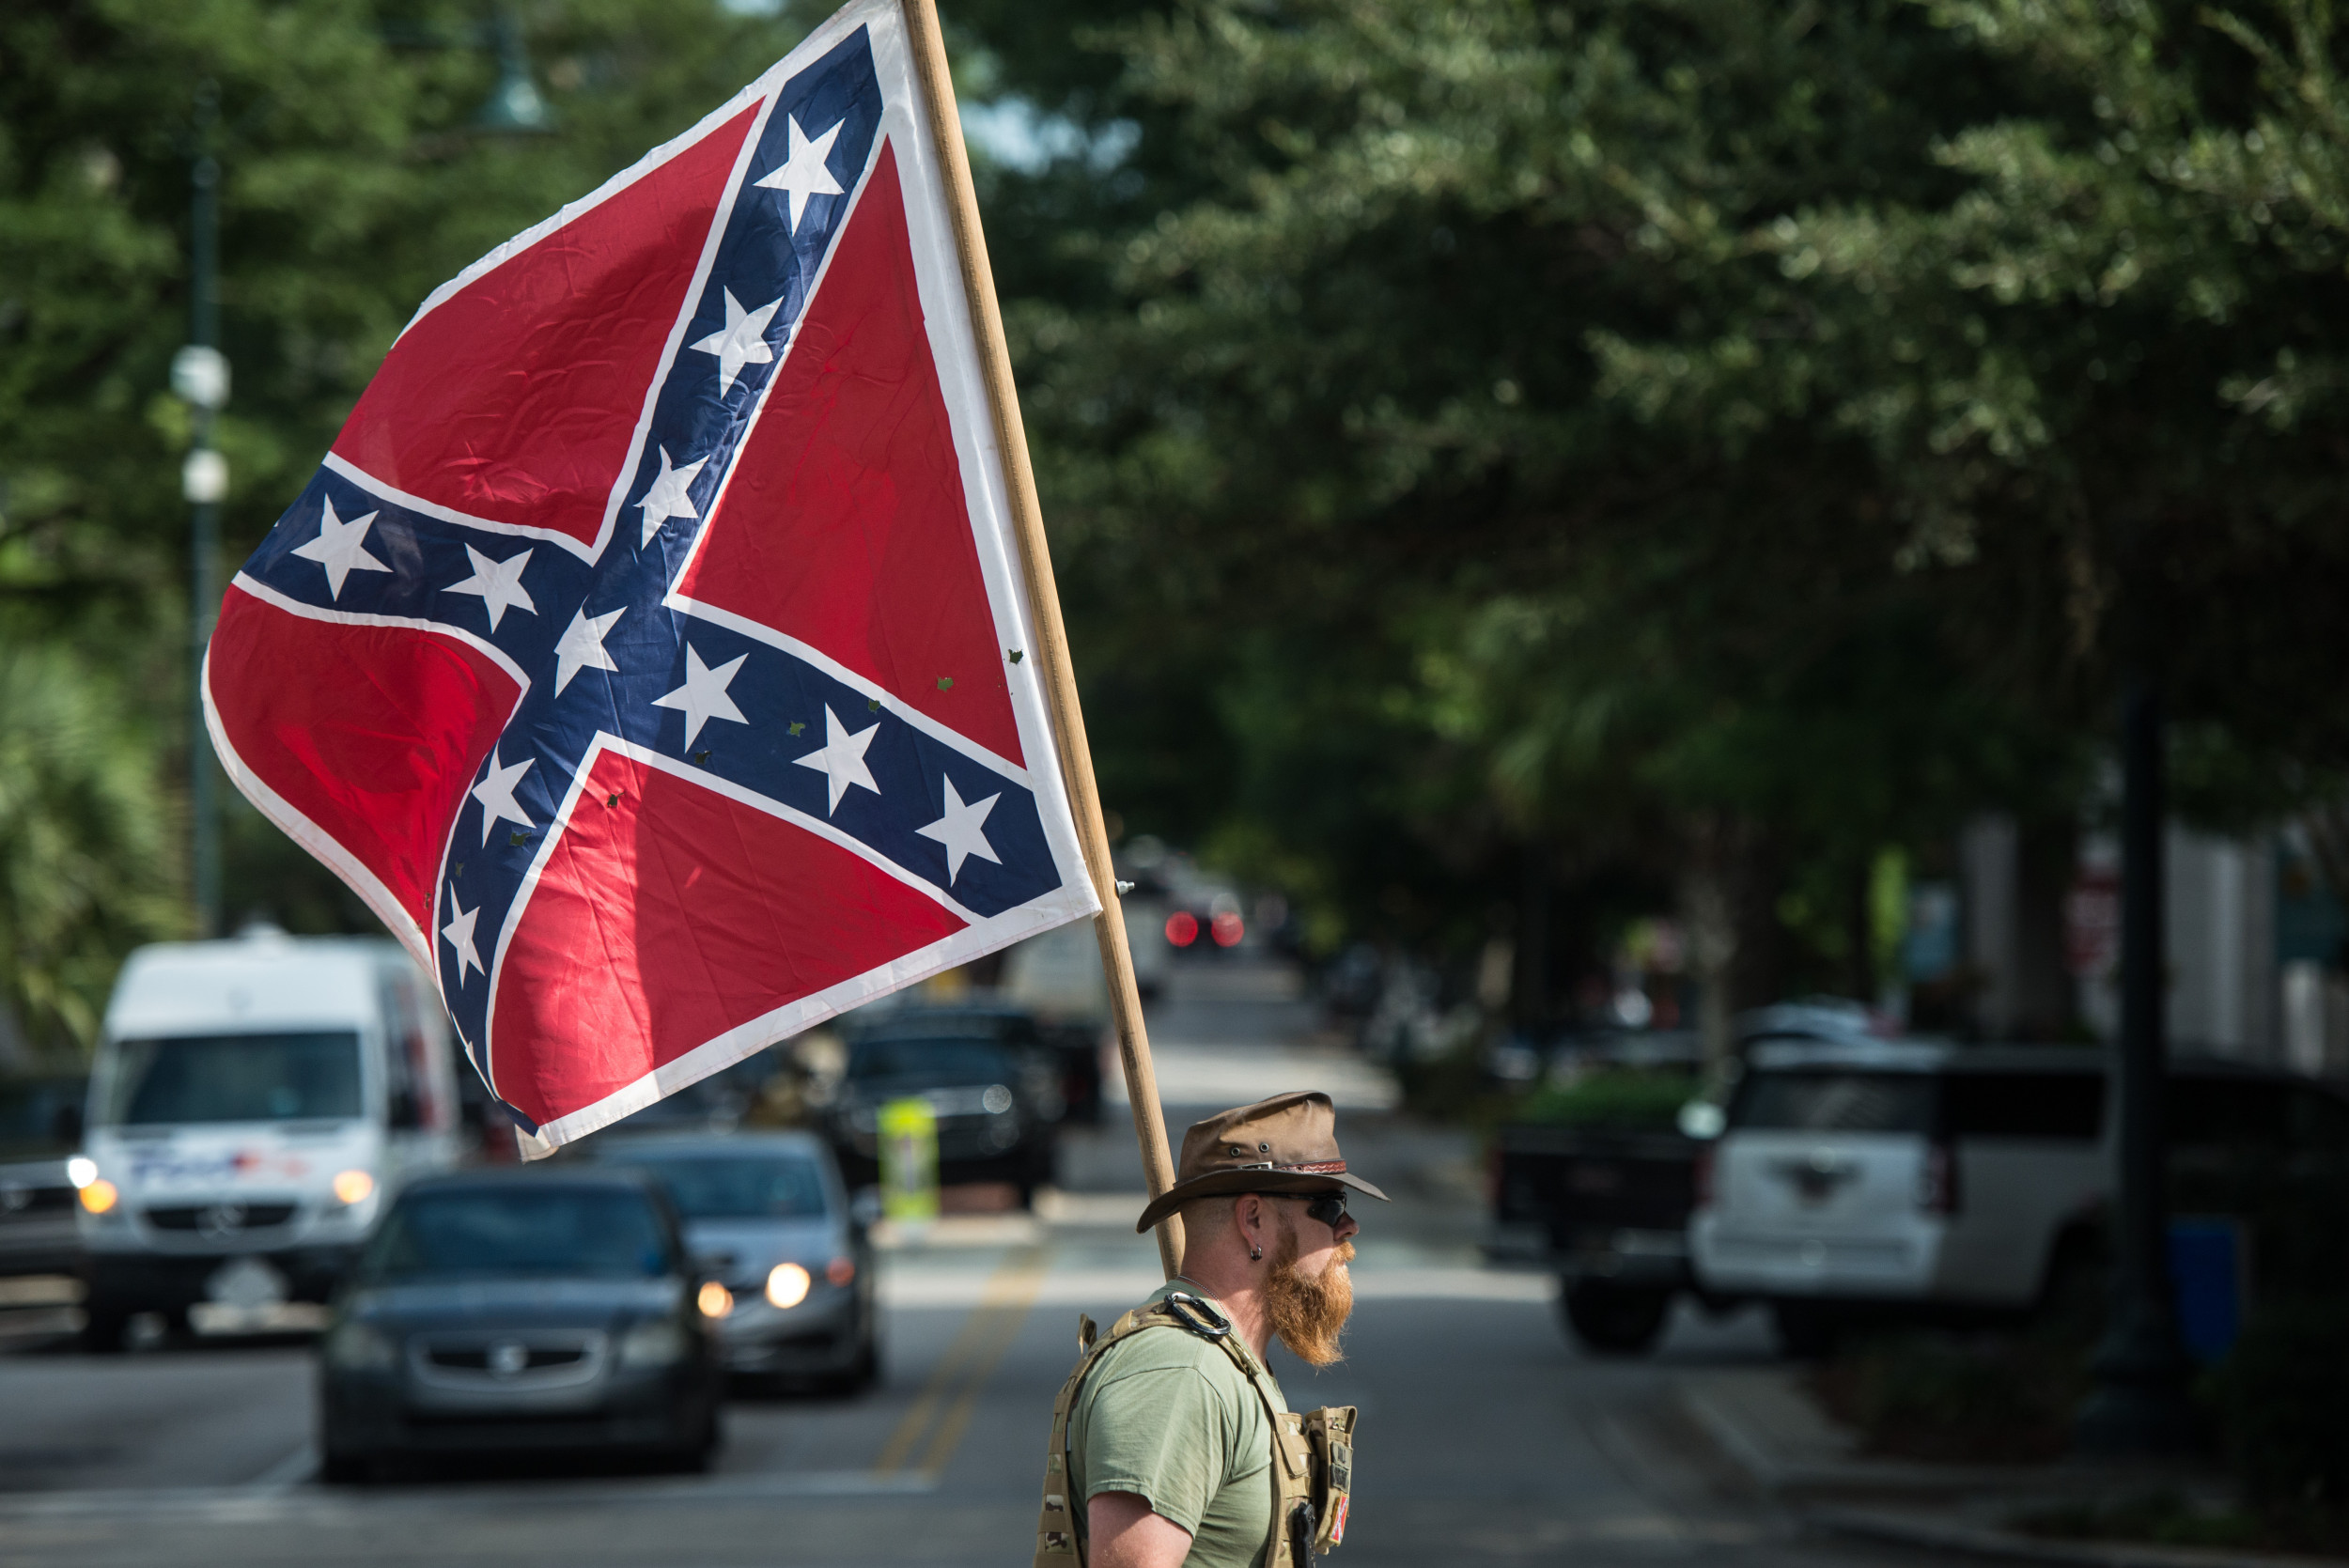 A member of the Sons of Confederate Veterans said: "Take down our ...